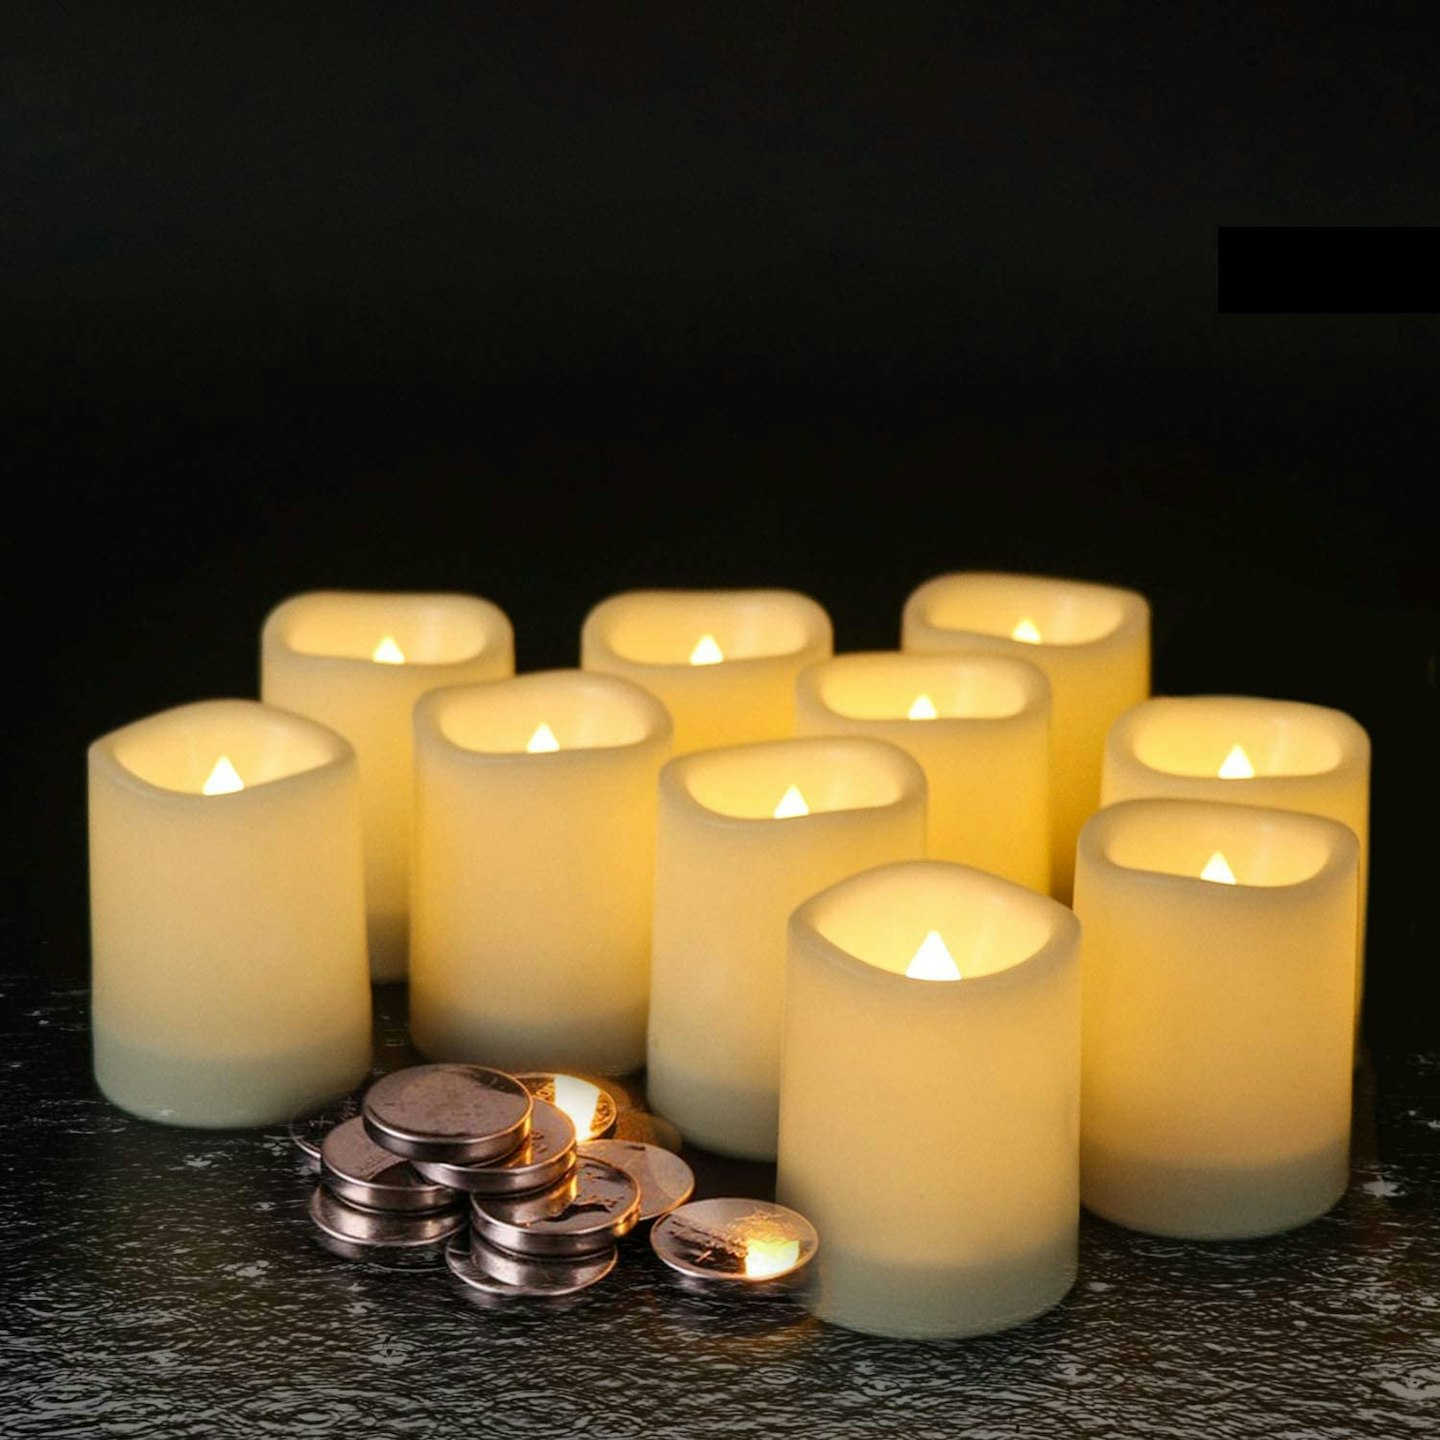 Eldnacele, Flameless Waterproof Outdoor Battery-Operated Candle (12)